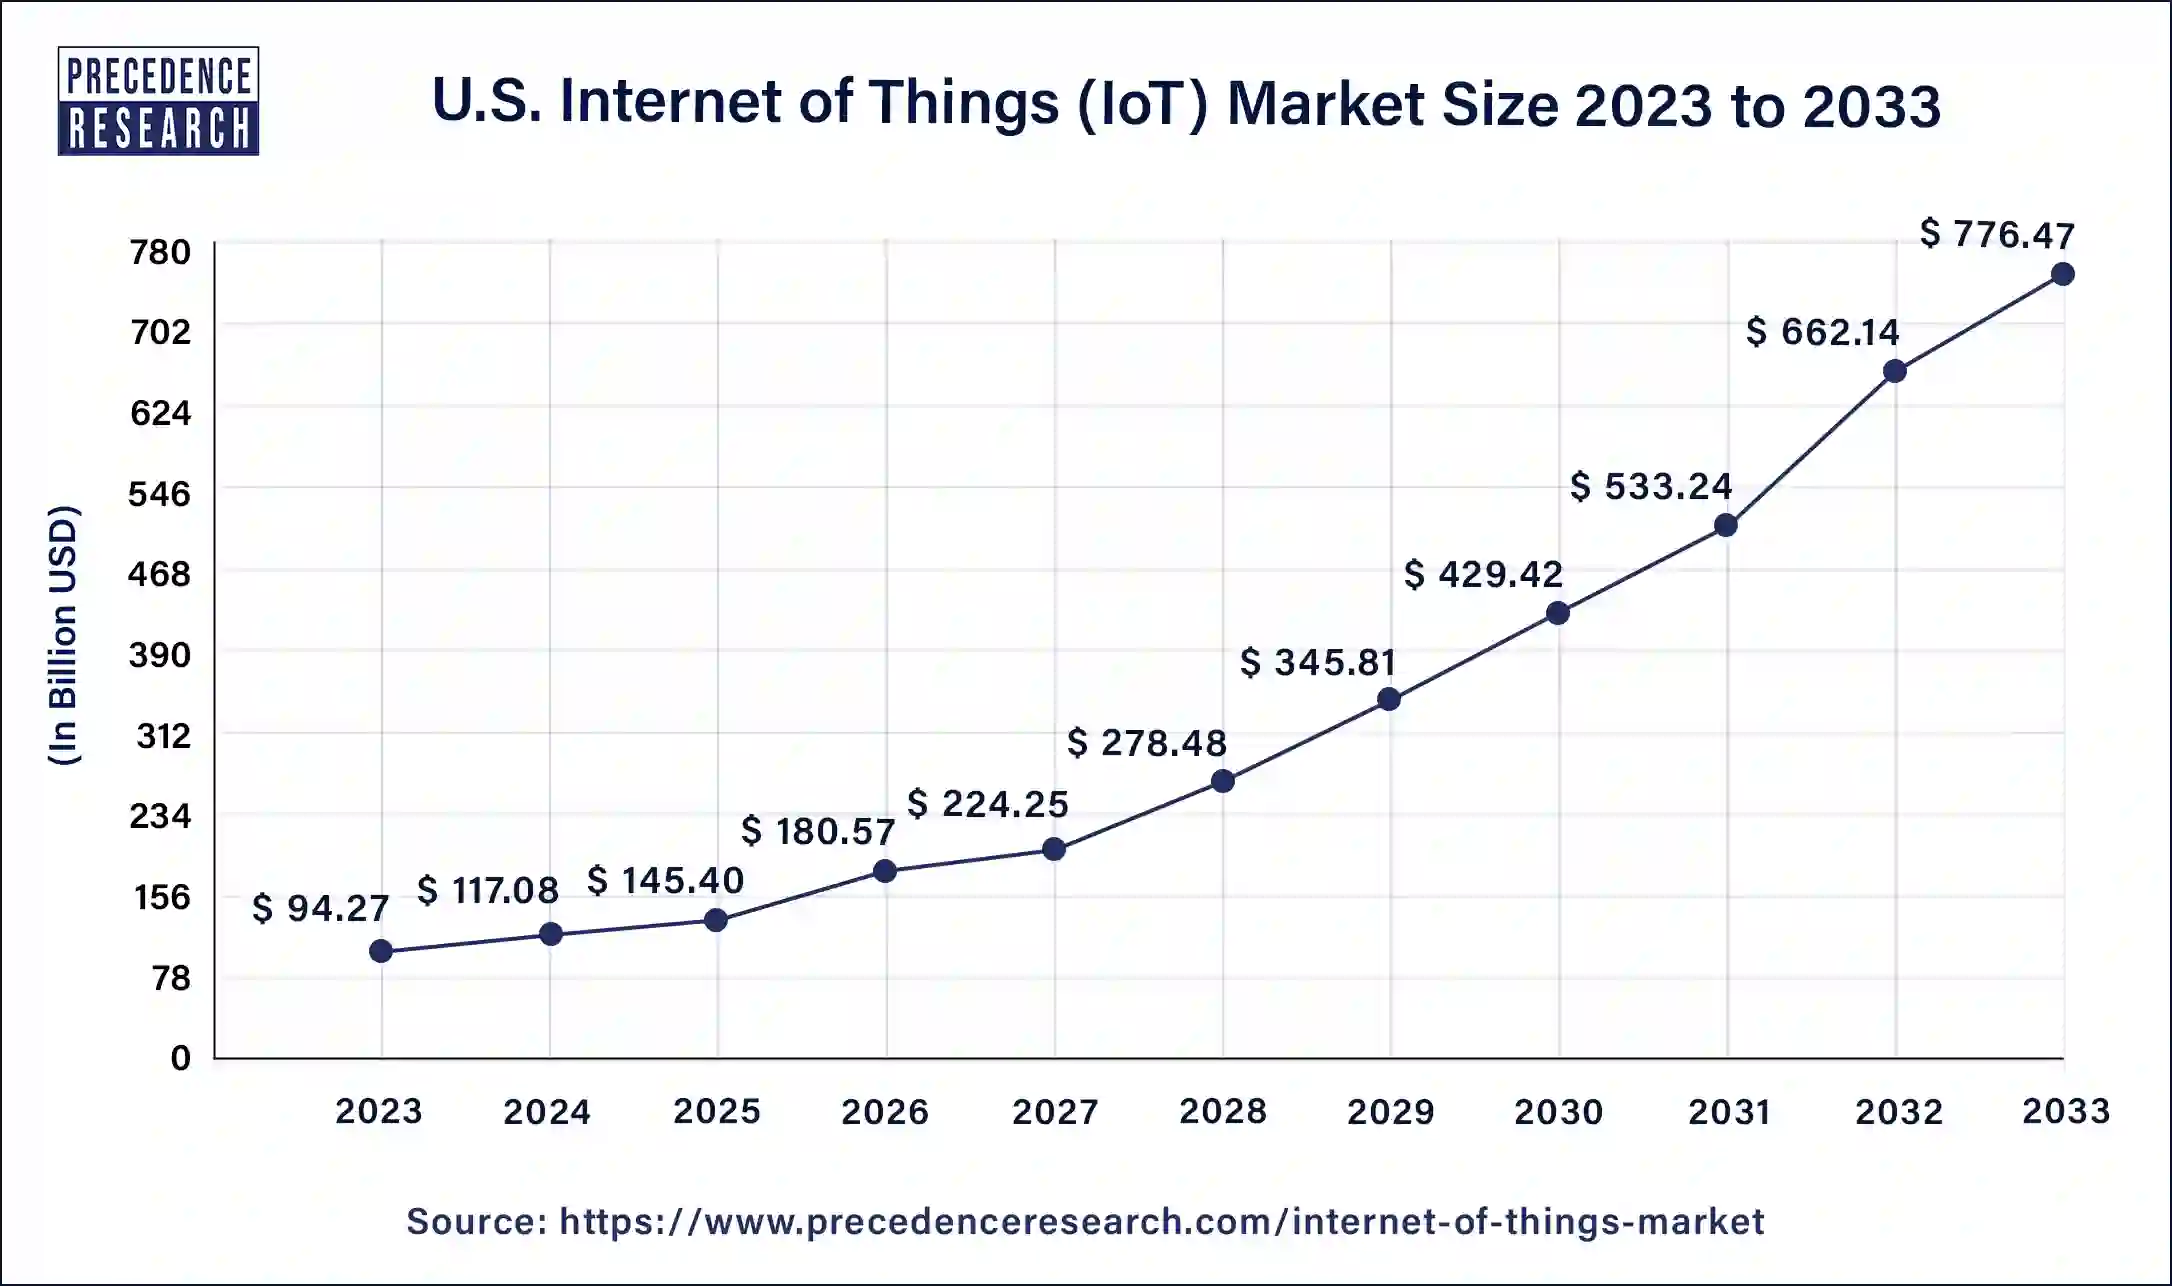 U.S. Internet of Things (IoT) Market Size 2024 to 2033